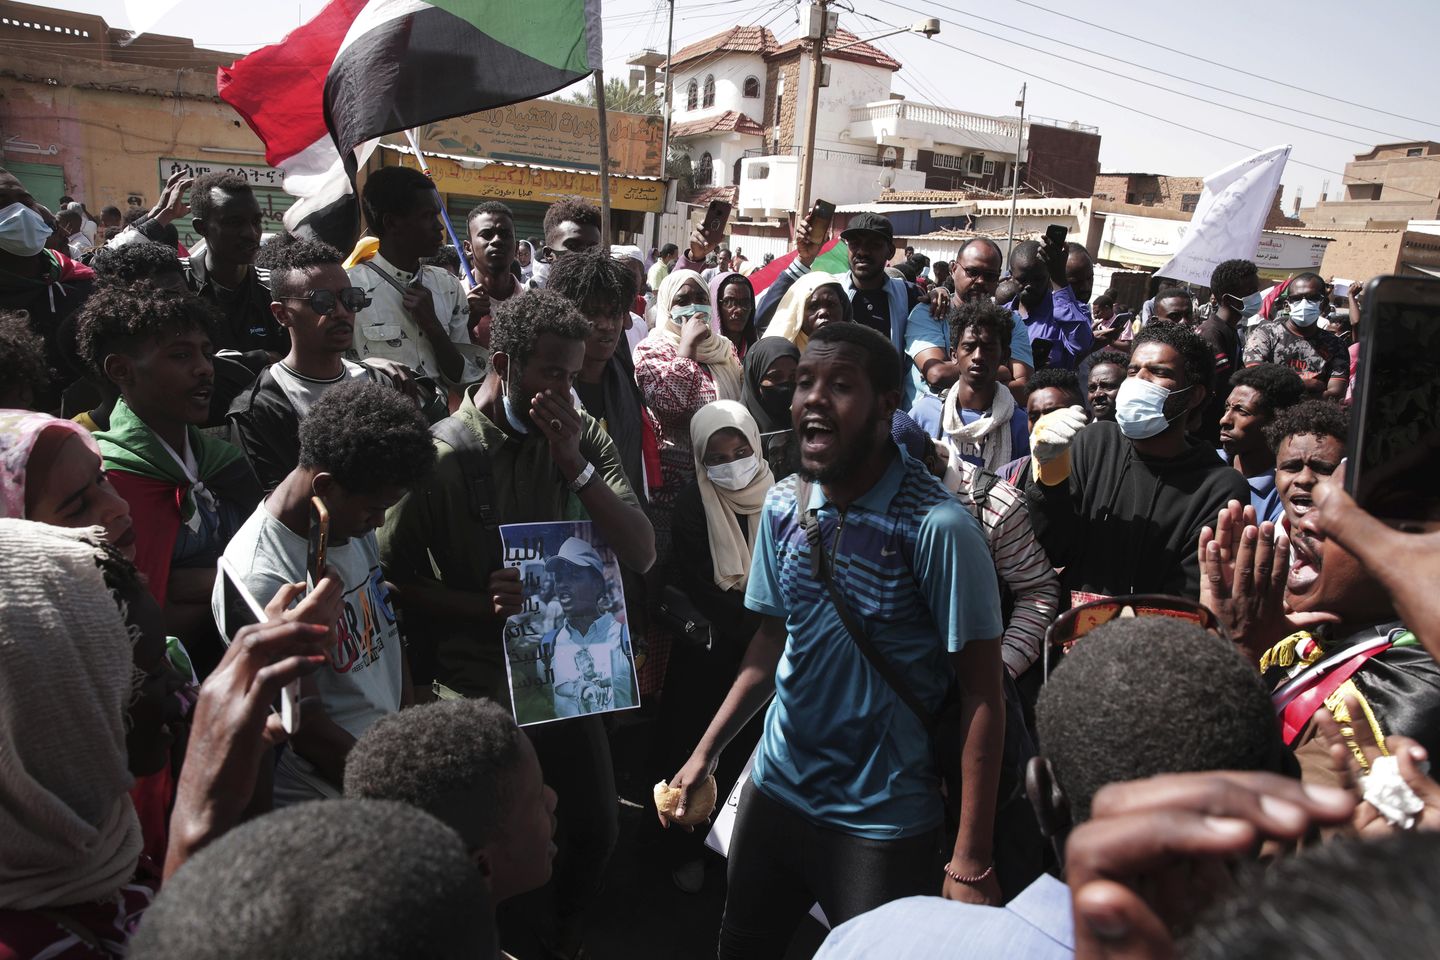 U.S. senior diplomats in Sudan to try resolve post-coup crisis